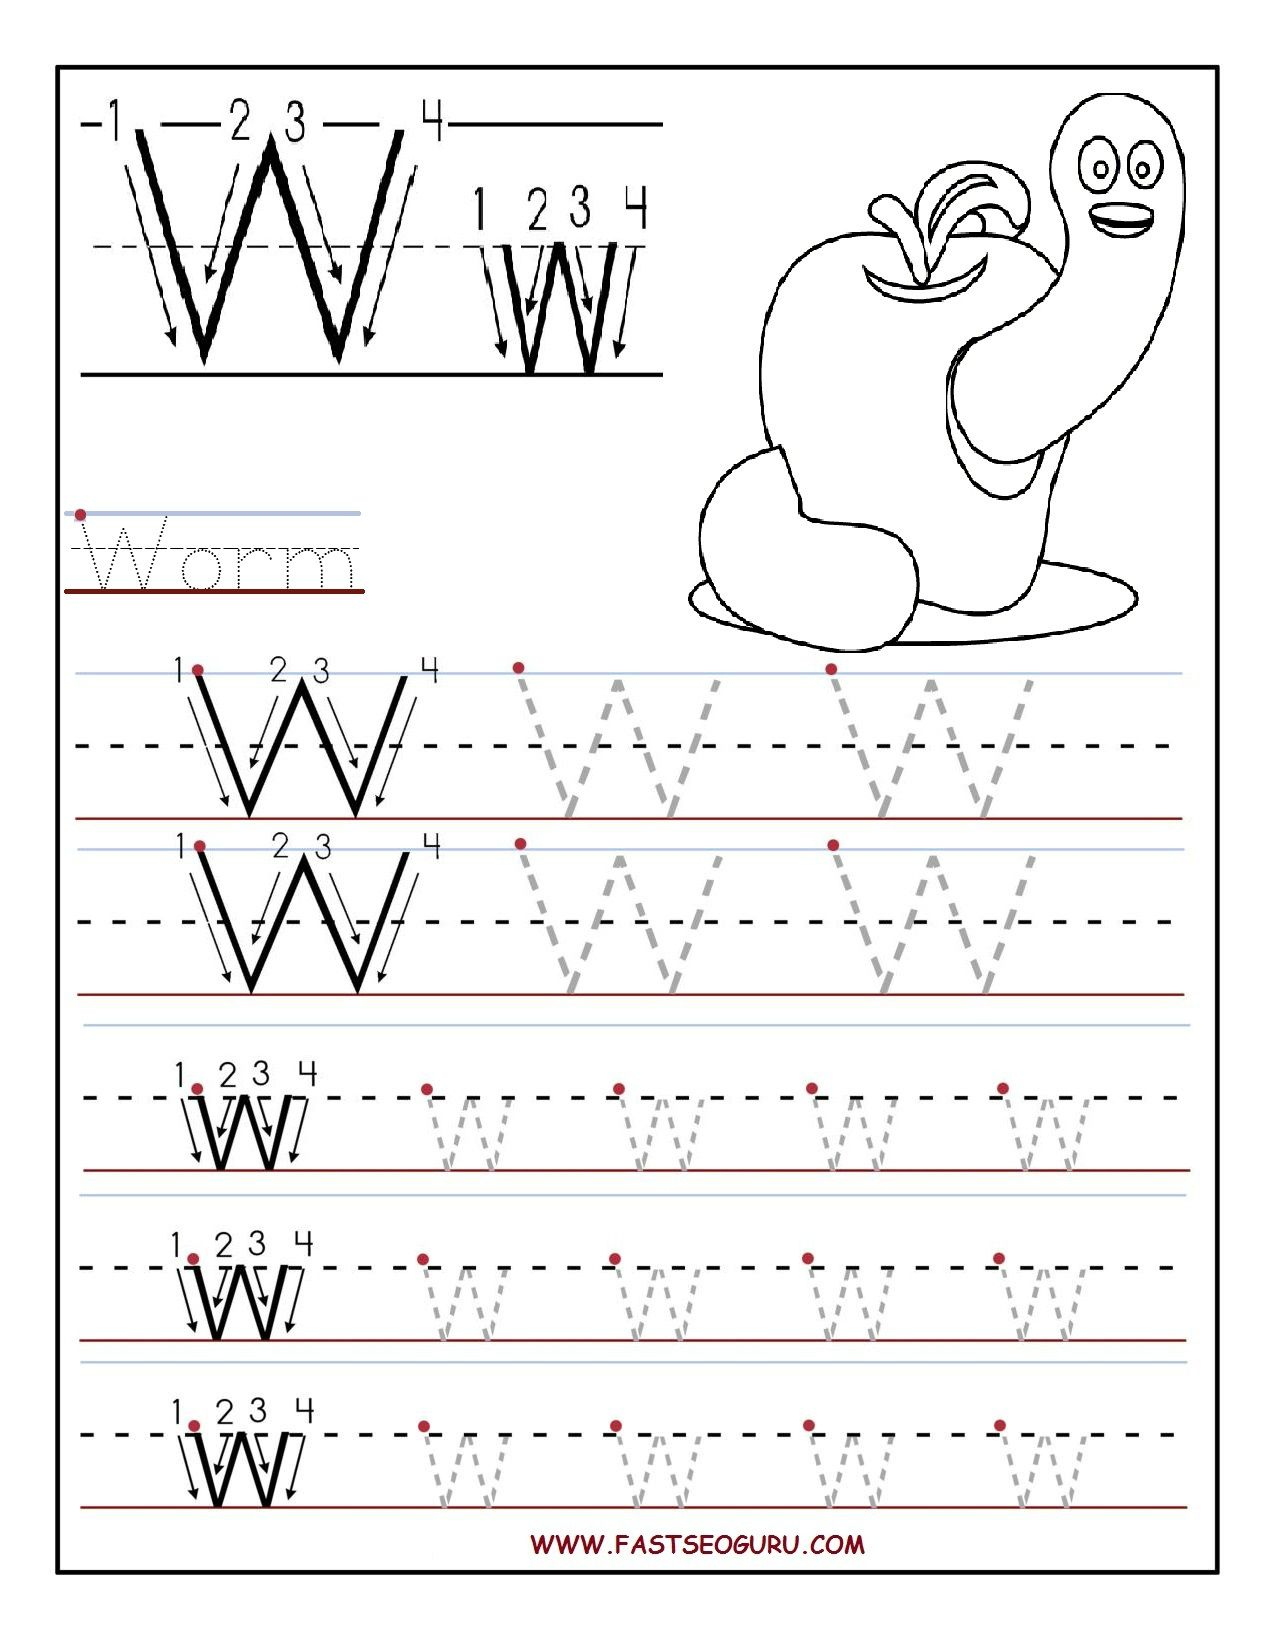 Pinvilfran Gason On Decor | Letter Tracing Worksheets within Letter W Worksheets For Pre K